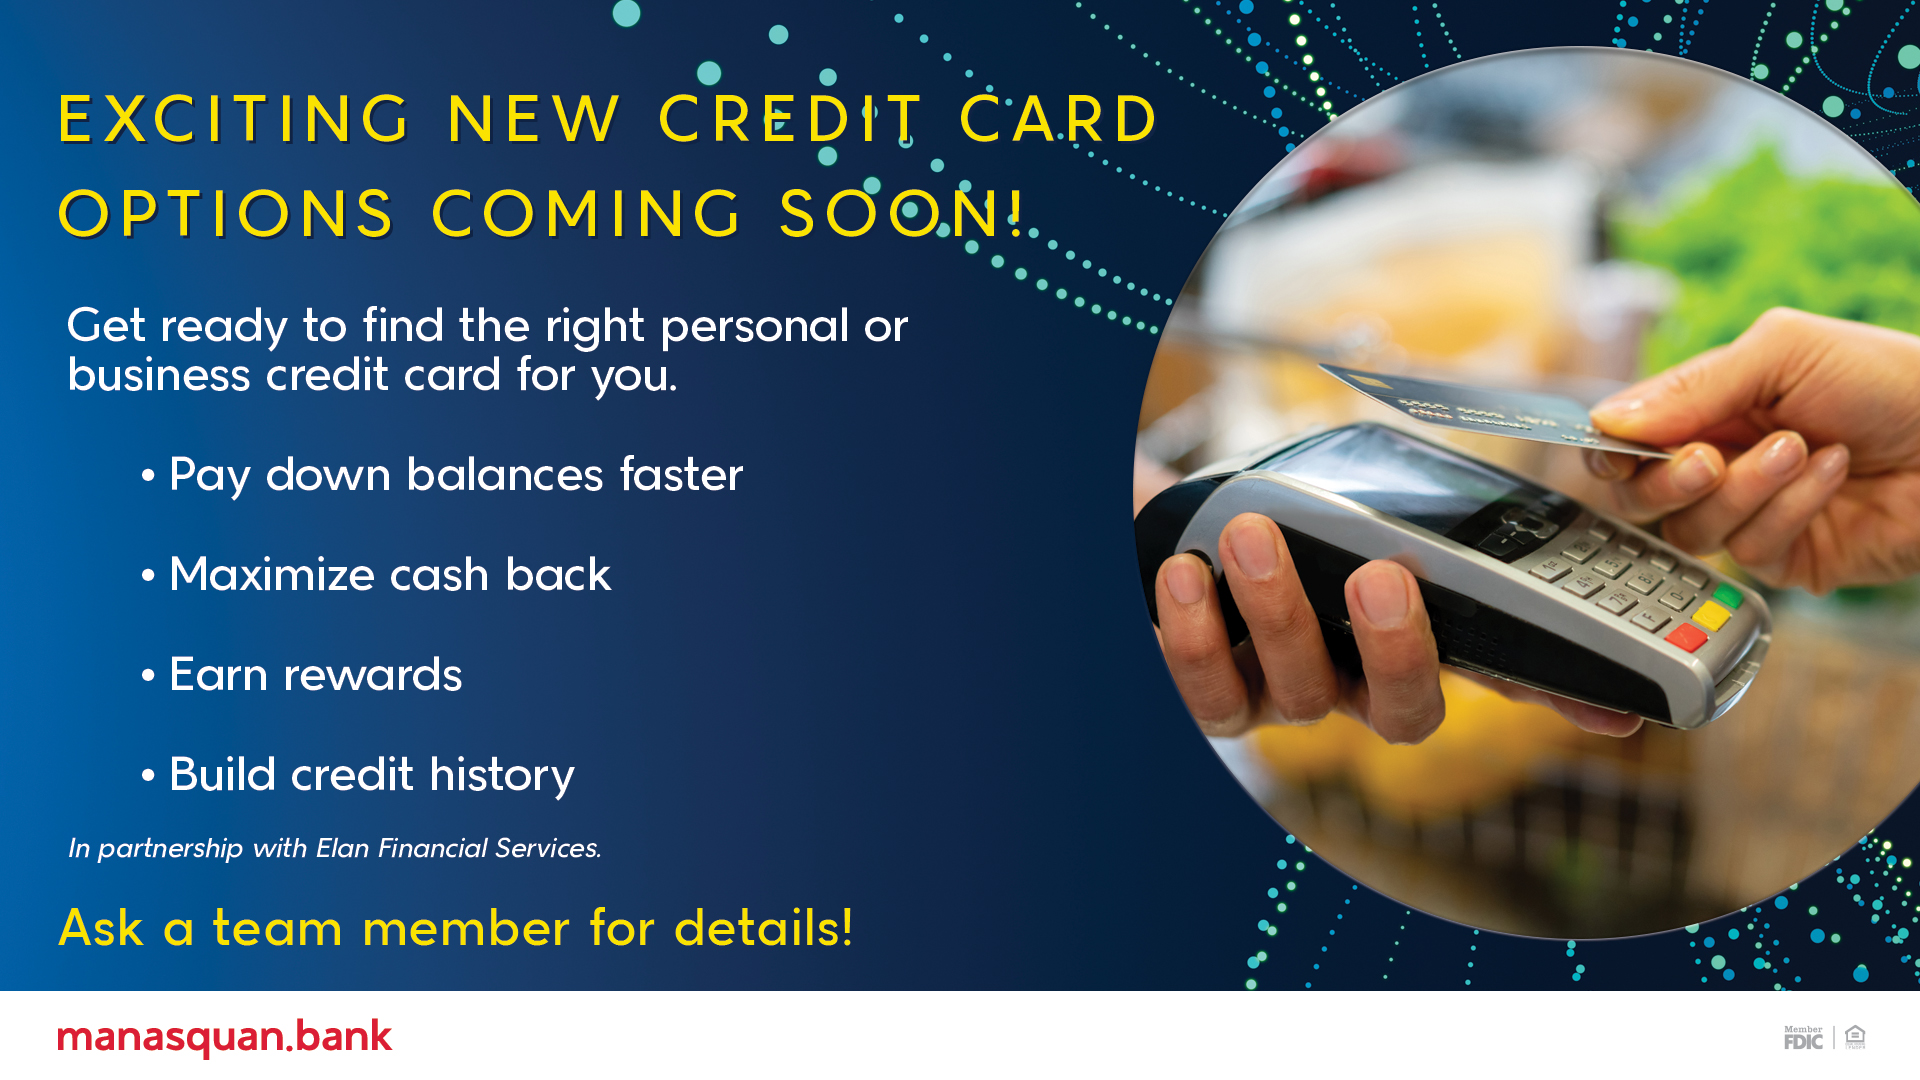 Exciting New Credit Card Options are Coming Soon!